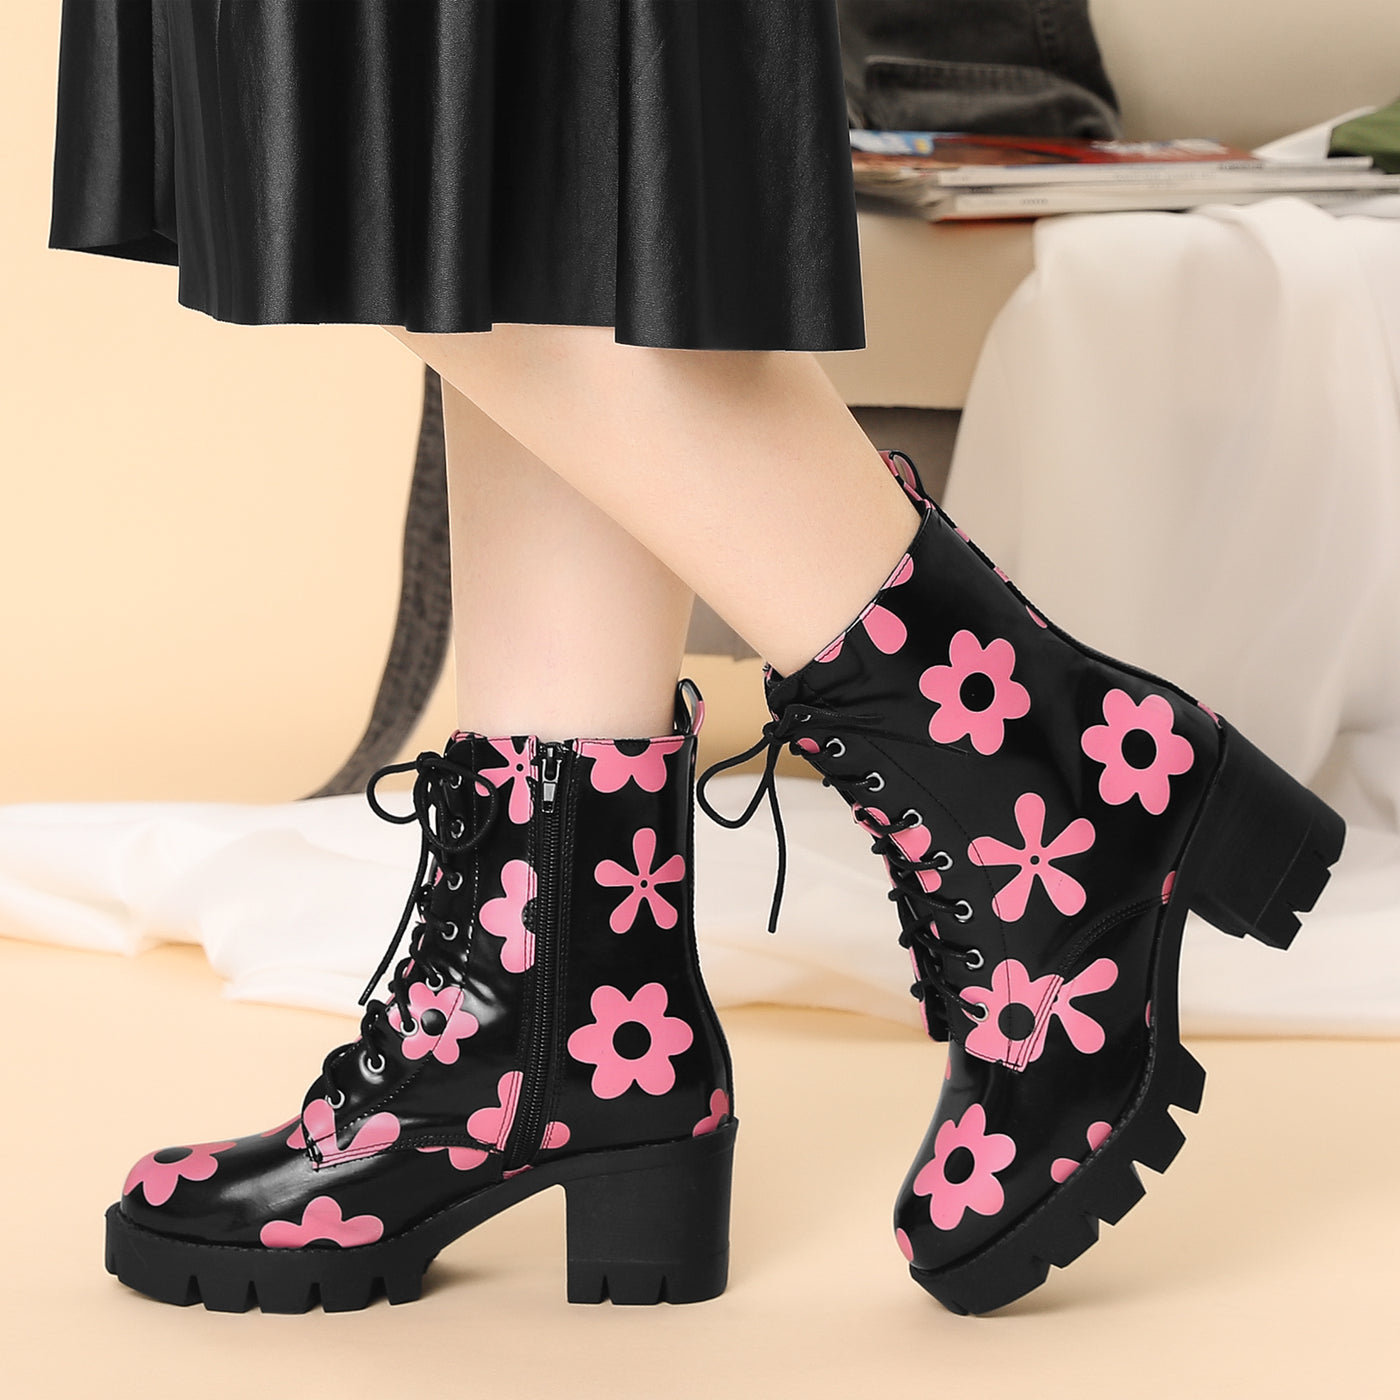 Allegra K Printed Platform Round Toe Lace Up Chunky Heel Combat Boots